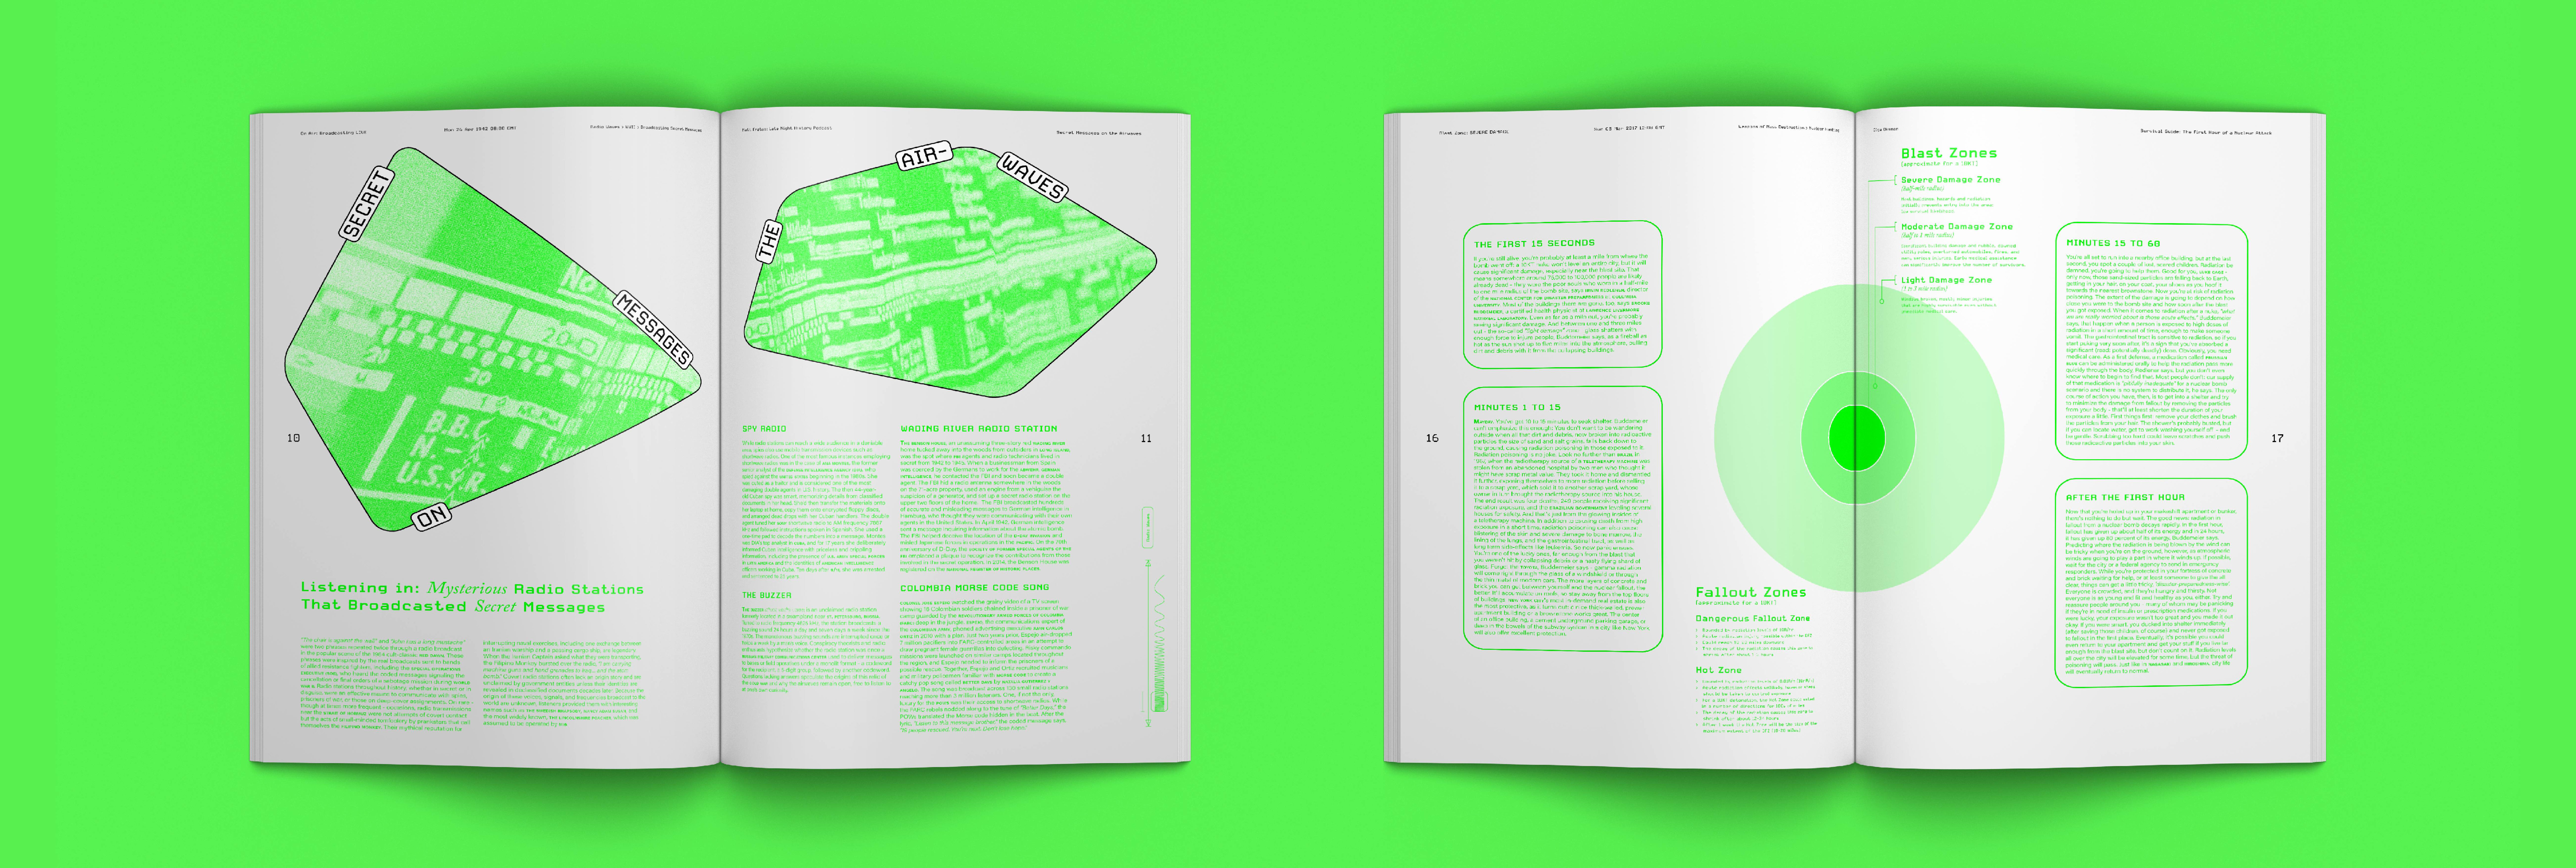 BA Design for Publishing work by Rebecca Hills, showing two adjacent editorial page spreads from the magazine ‘Exposure’ using a striking combination of neon green and black inks.